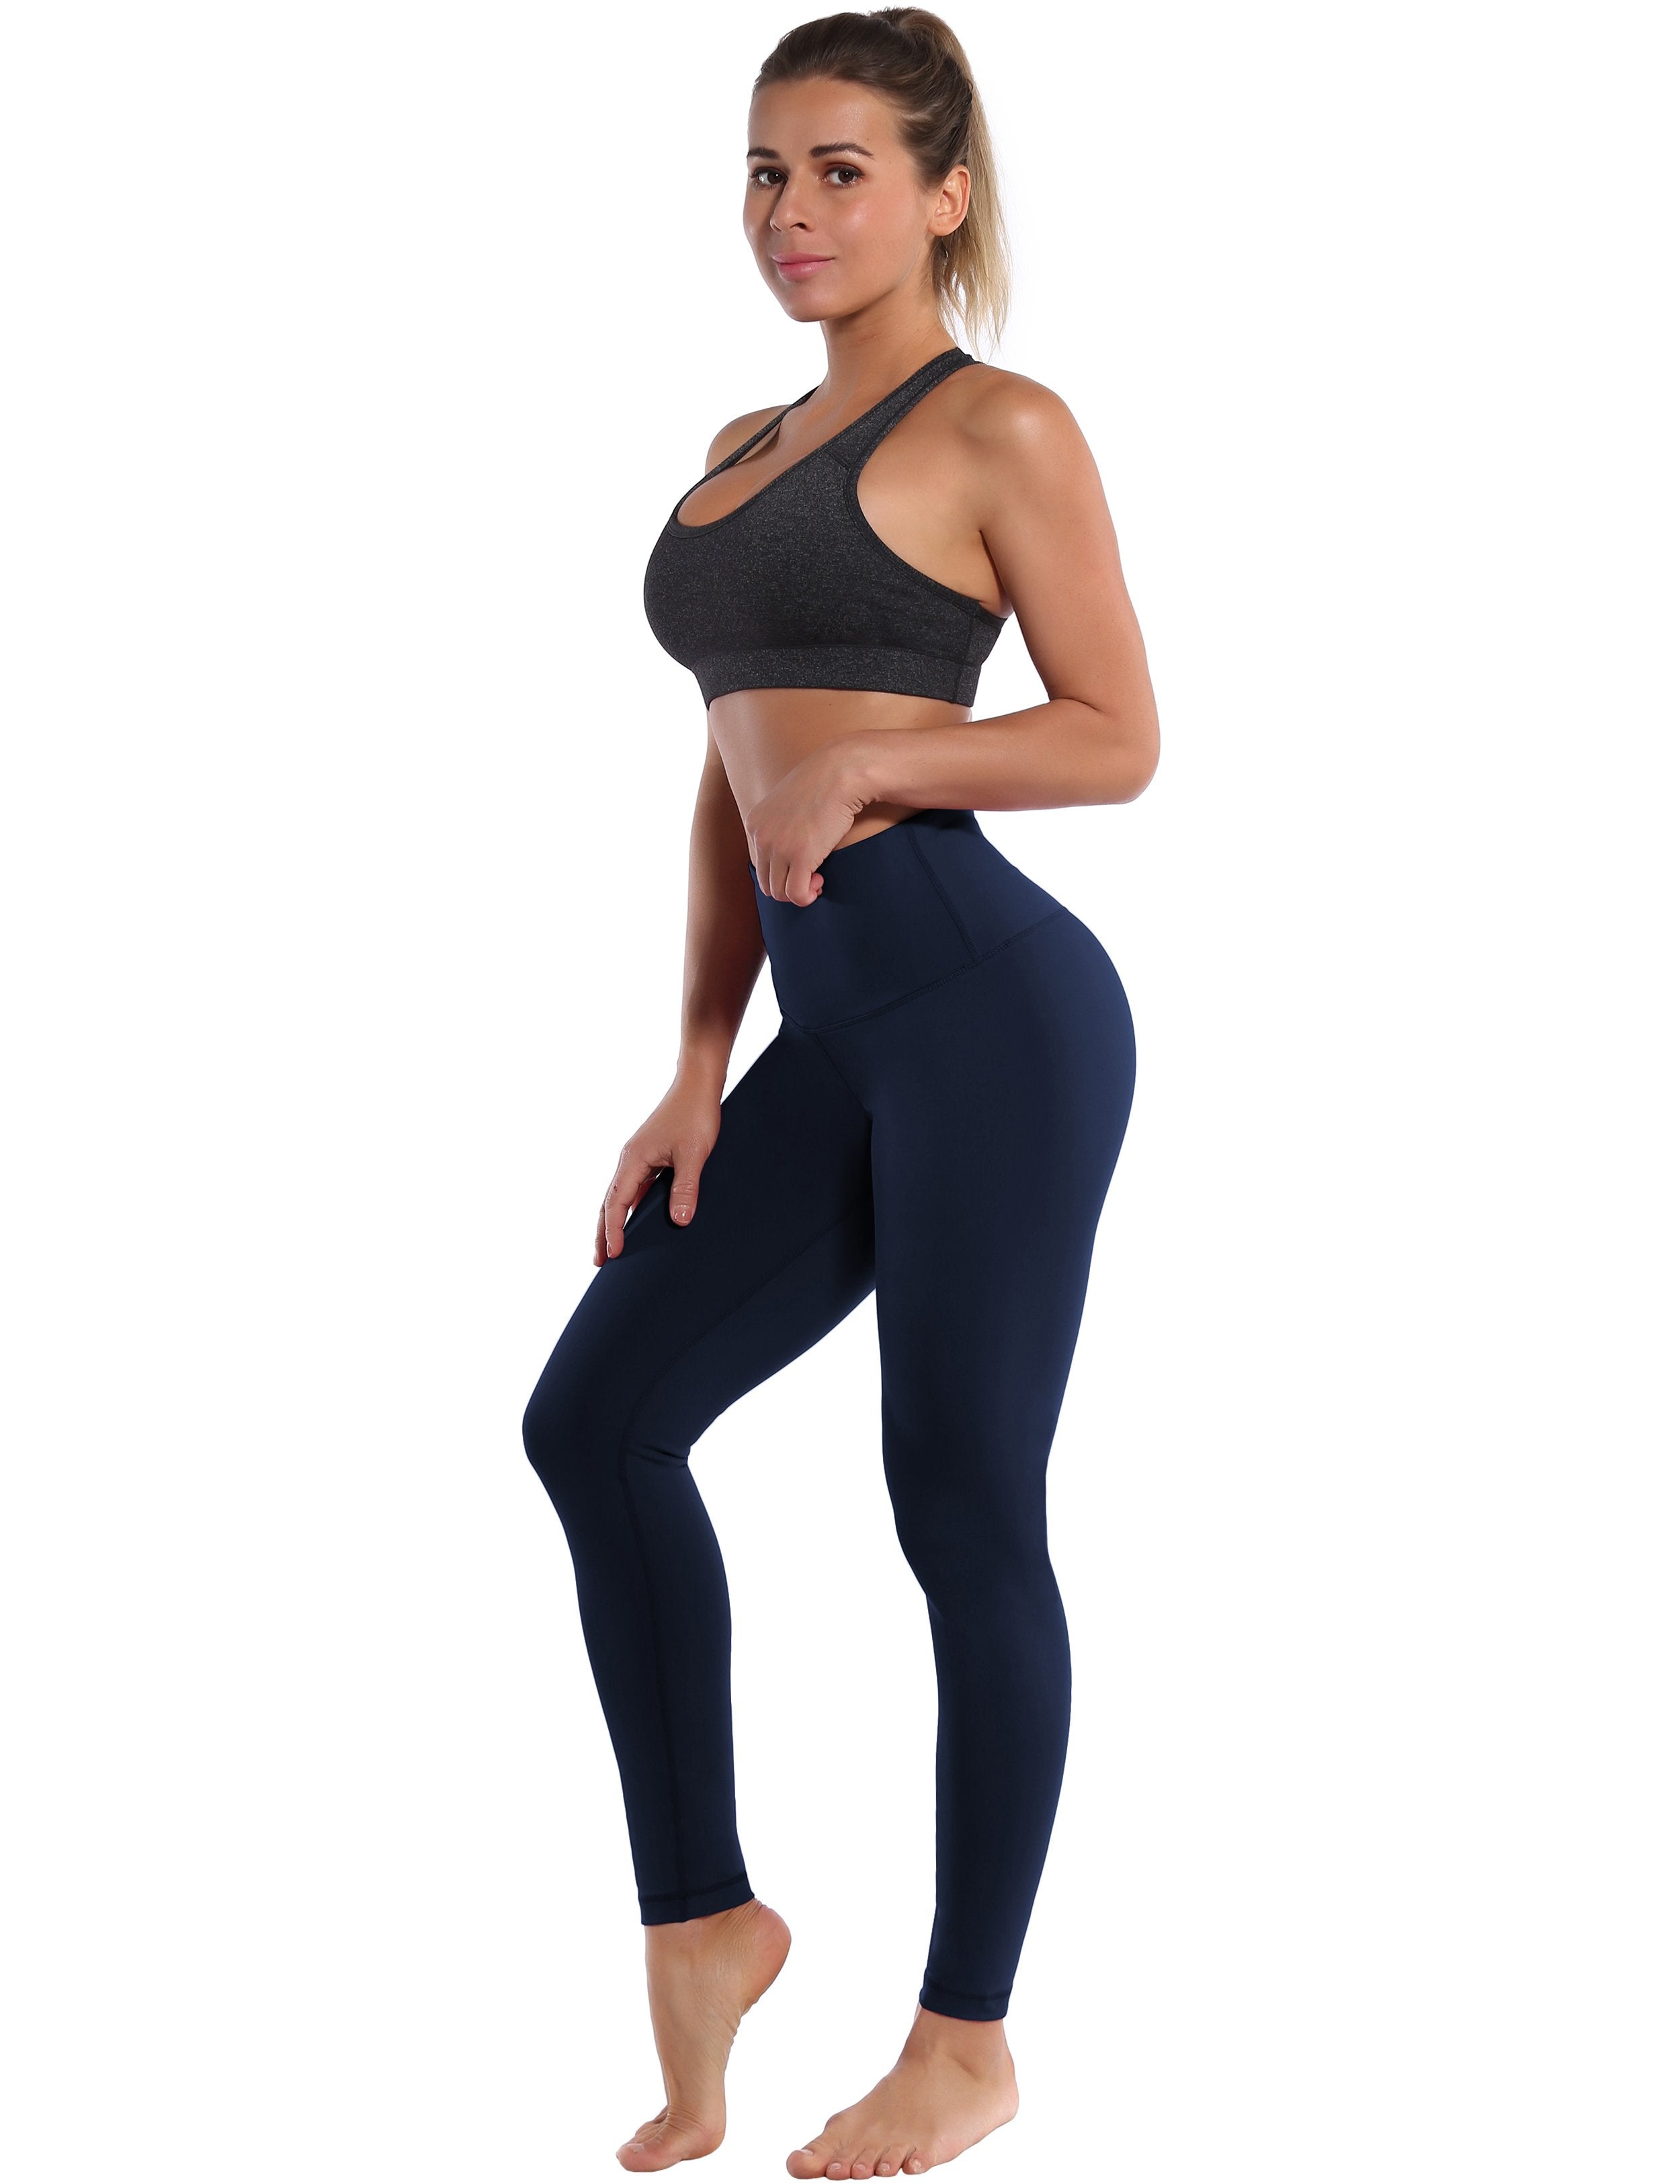 High Waist Yoga Pants darknavy 75%Nylon/25%Spandex Fabric doesn't attract lint easily 4-way stretch No see-through Moisture-wicking Tummy control Inner pocket Four lengths